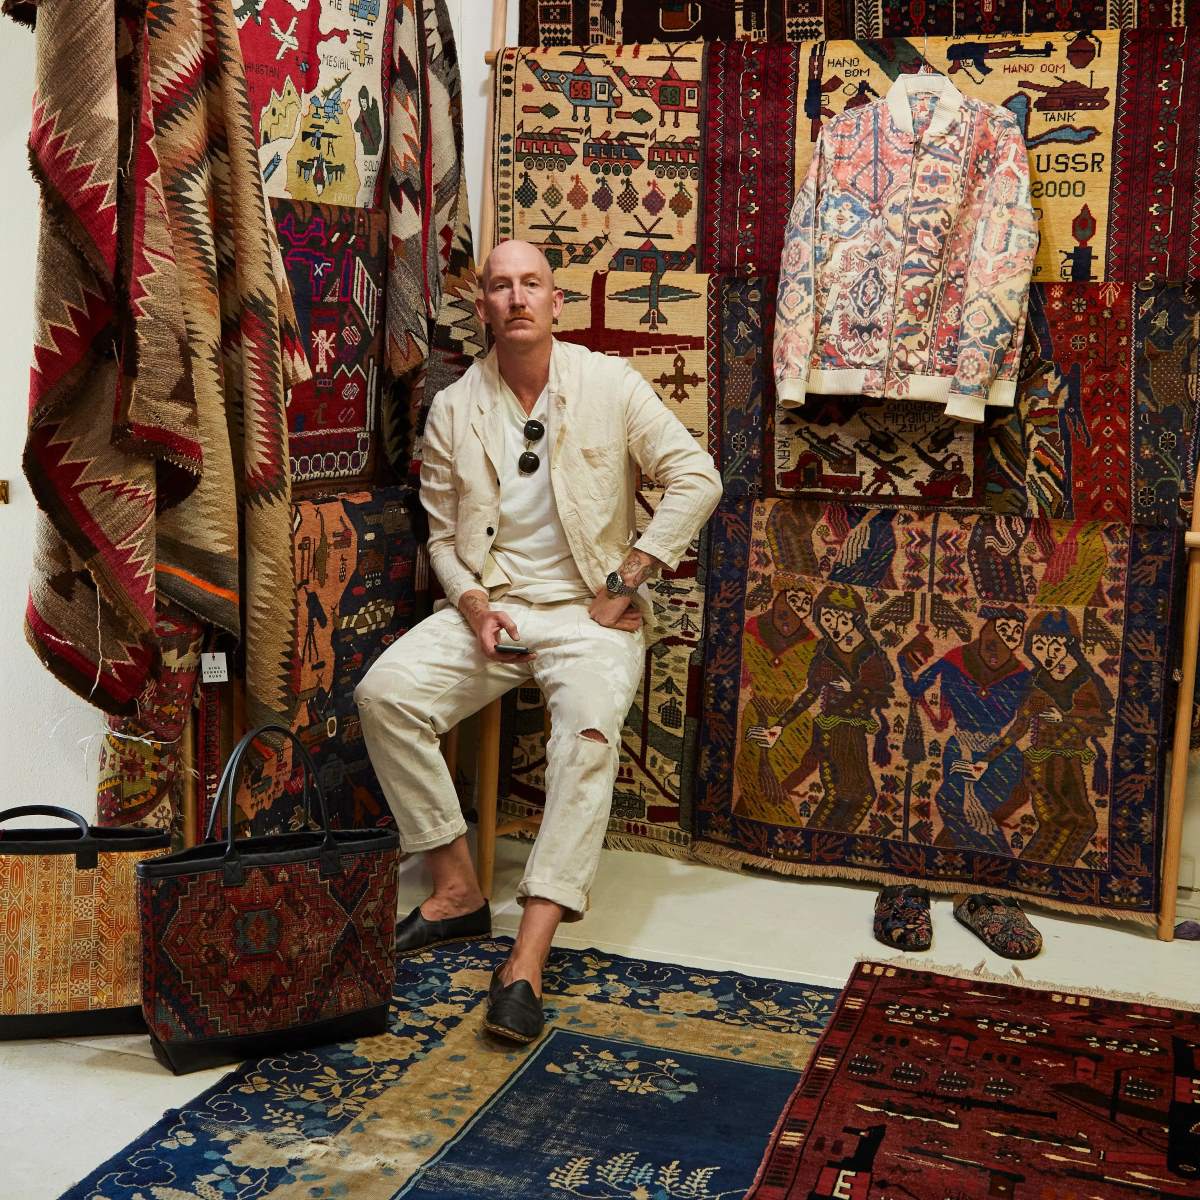 How Expensive Are Persian Rugs